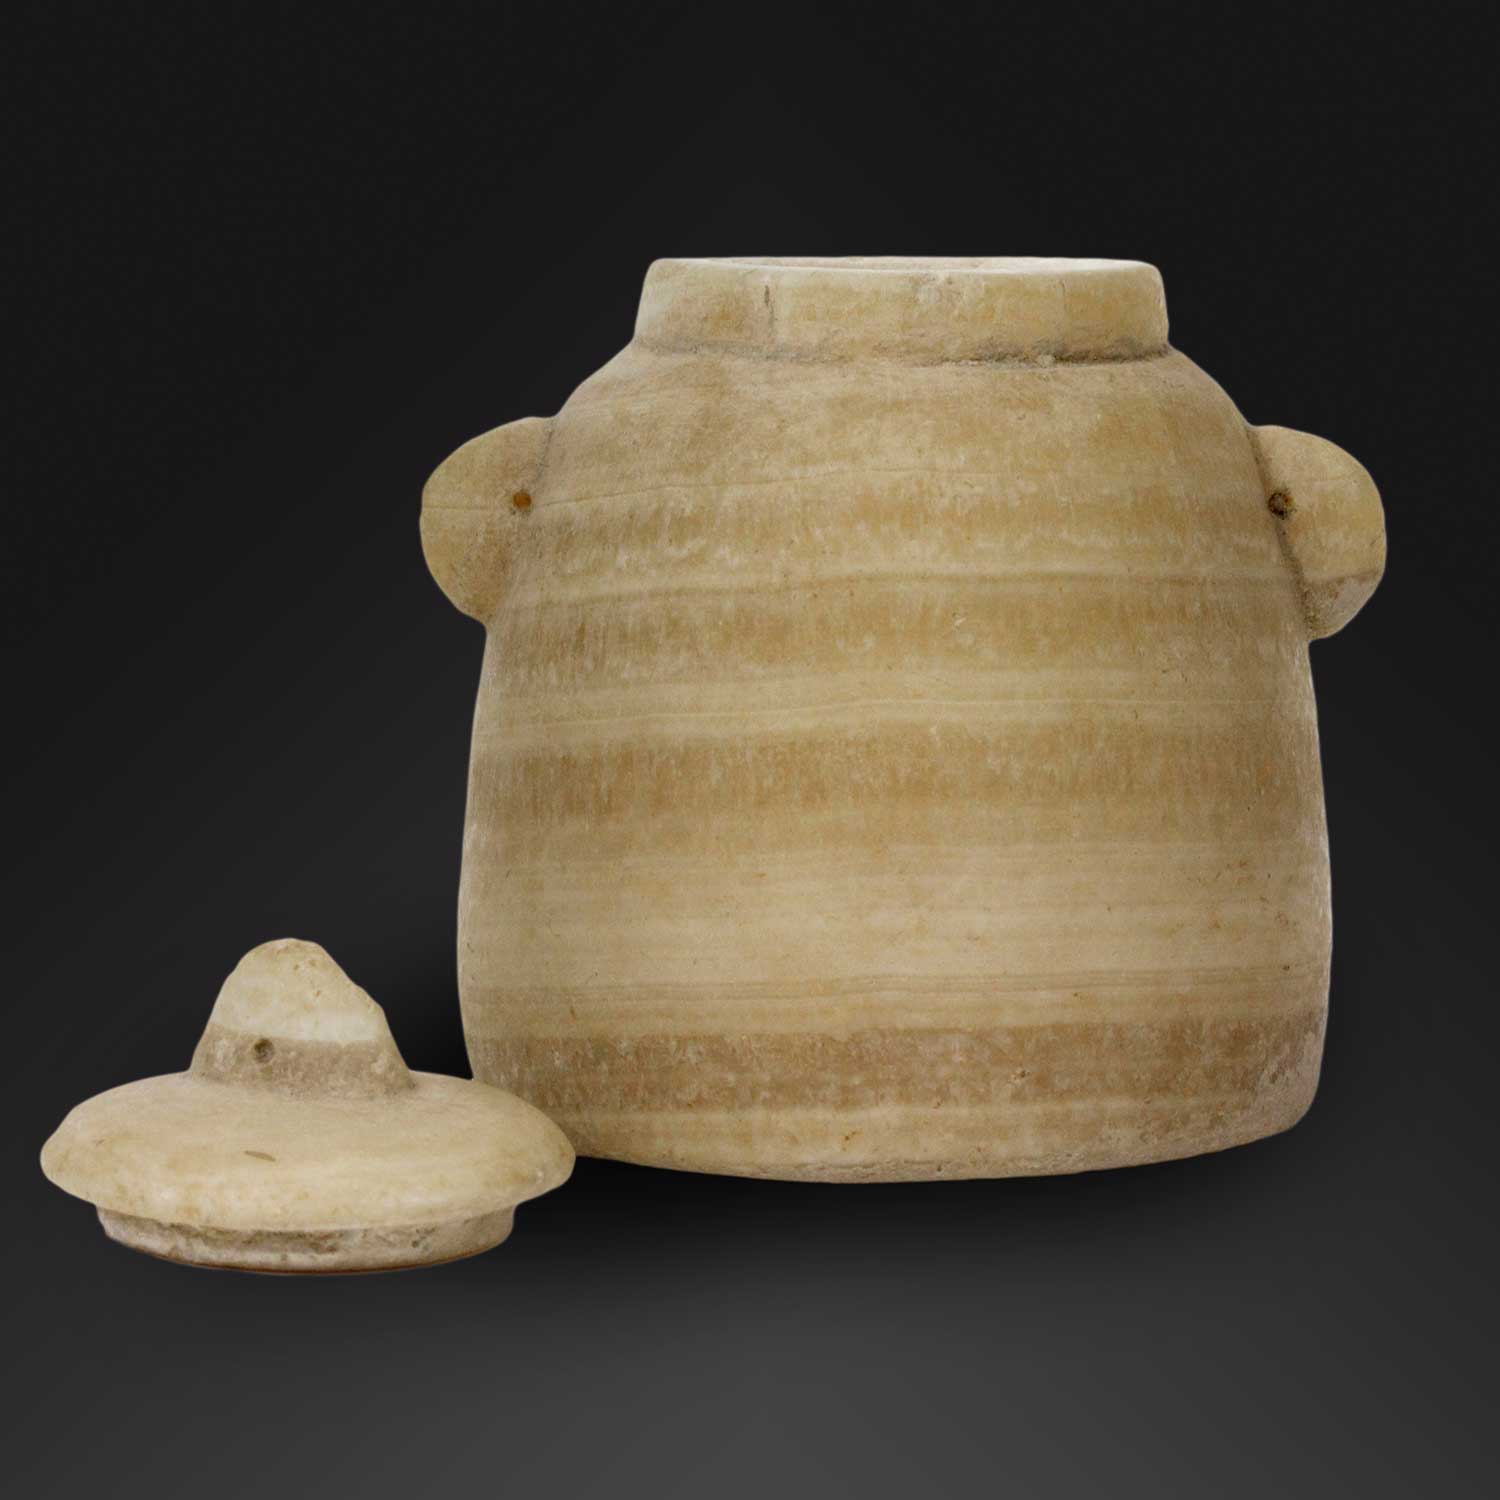 A Biblical "Beehive" Unguent Jar and Lid, Hellenistic Period, ca. 3rd-1st Century BCE